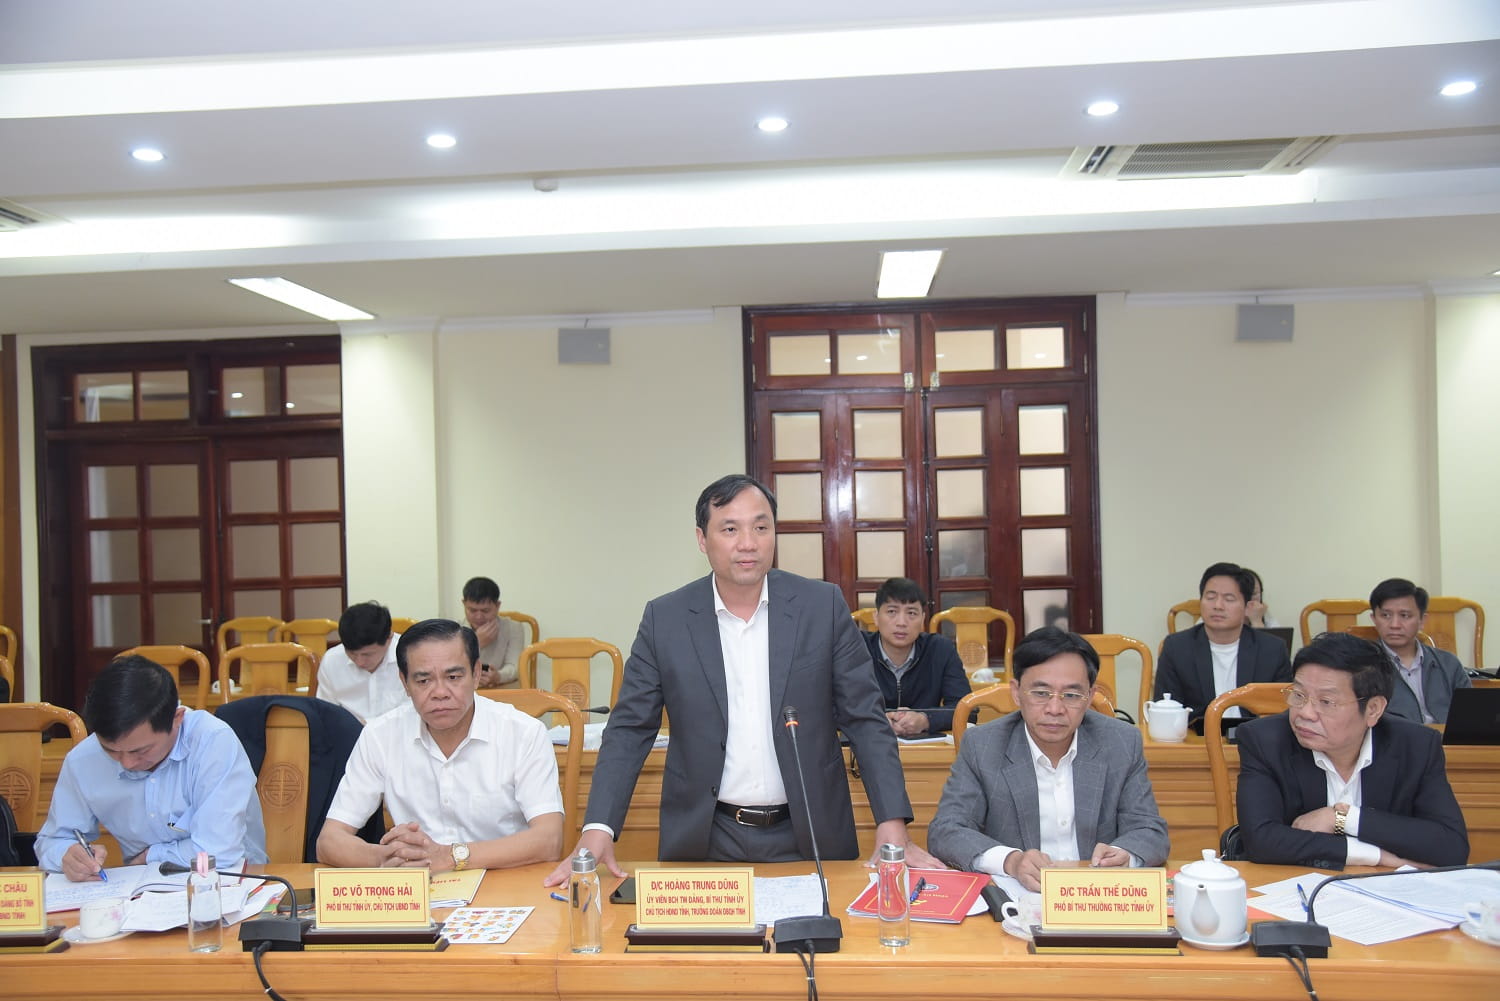 Chairman of the Provincial People's Council, Head of the Provincial Delegation of National Assembly - Mr. Hoang Trung Dung